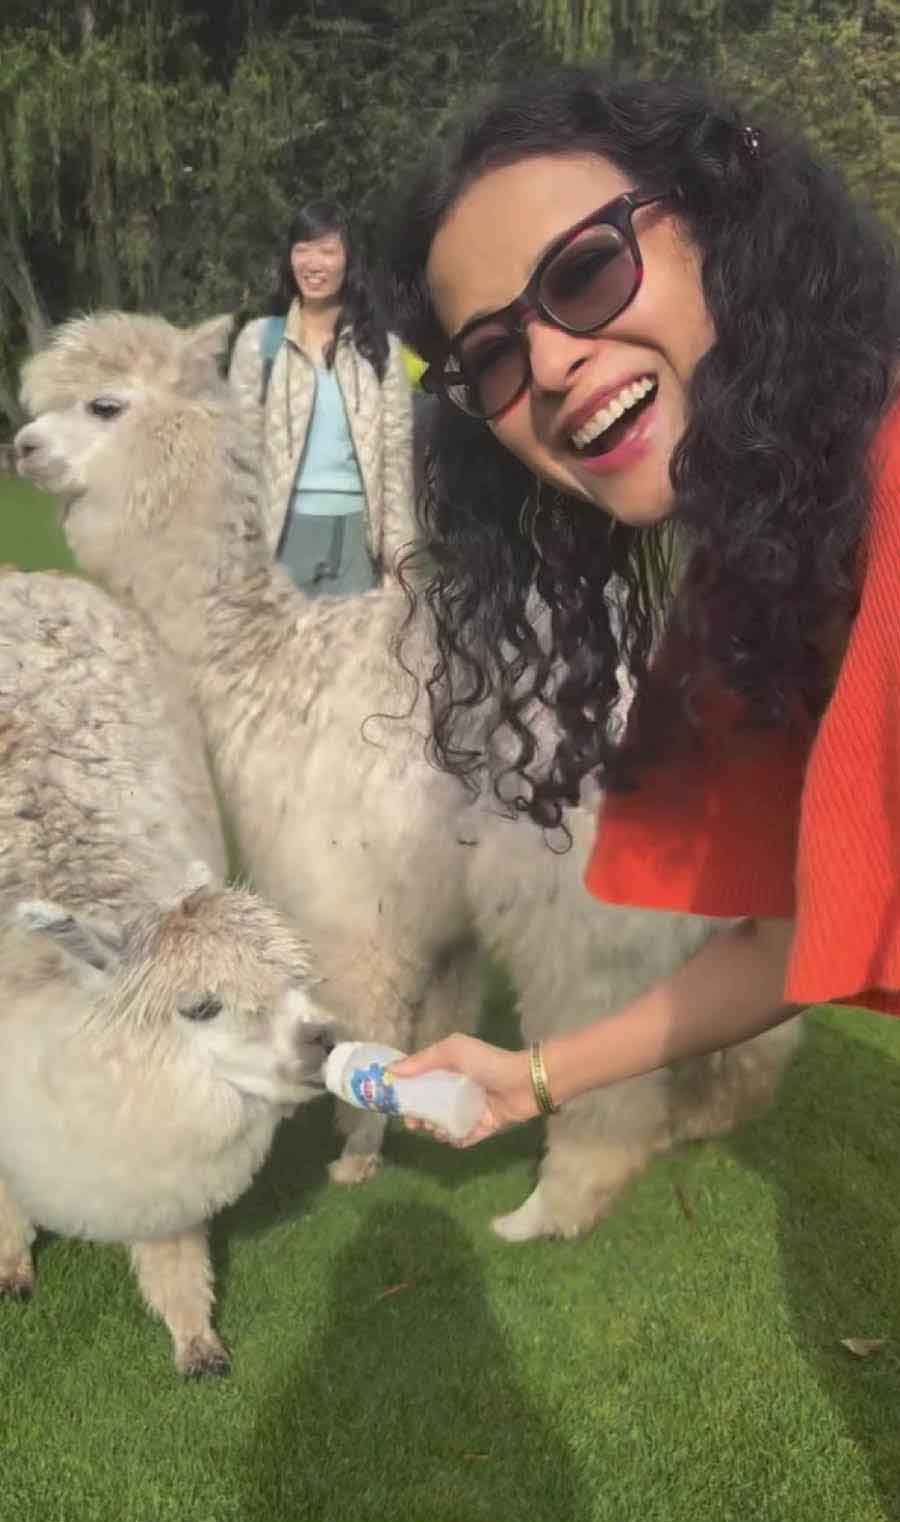 Writer, child-rights activist and actor Nandana Dev Sen uploaded this photograph early on Saturday with the caption: ‘Did you know that llamas are very social? Llamas live in herds, and will even ‘adopt’ groups of sheep or goats as their own herd. They protect their herds by chasing off predators like coyotes.  Enjoying feeding this sweet baby llama in Peru.  #fridayfunfacts #fridayfun #travelmemories #llamas #peru #nandanasen #bollyqueen #tollyqueen #tollywoodactress #tollywoodfans #bengali #llamalover’